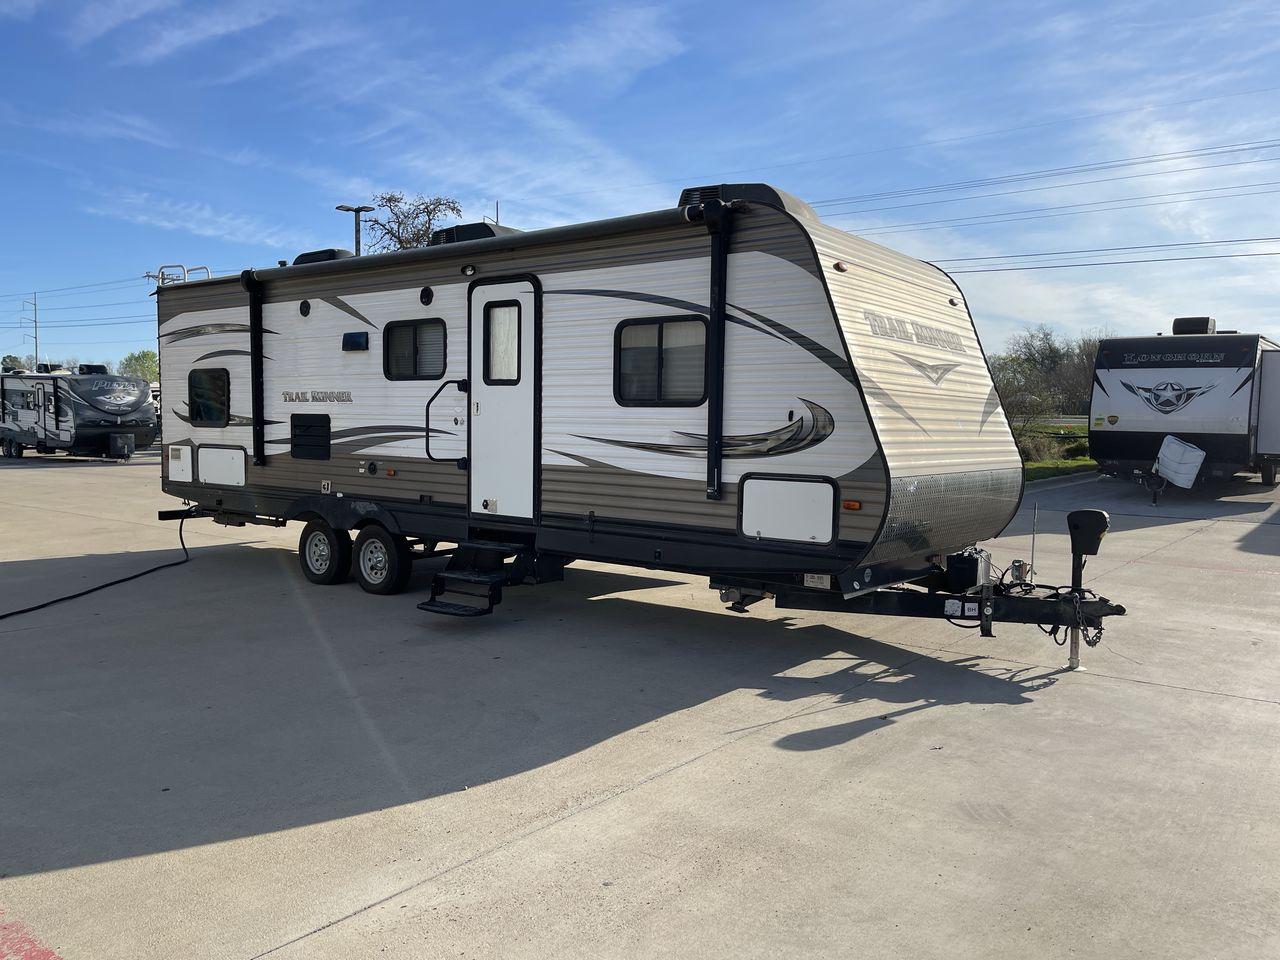 2017 HEARTLAND TRAILRUNNER 27FQBS (5SFEB3029HE) , Length: 30.58 ft. | Dry Weight: 6,081 lbs. | Gross Weight: 7,700 lbs. | Slides: 1 transmission, located at 4319 N Main St, Cleburne, TX, 76033, (817) 678-5133, 32.385960, -97.391212 - The 2017 Heartland Trail Runner 27FQBS is a versatile and well-designed travel trailer tailored for unforgettable outdoor adventures. Measuring 30 feet in length and boasting a dry weight of 6,081 lbs, this model offers a perfect balance of spaciousness and towing convenience. Built with a durable e - Photo #23